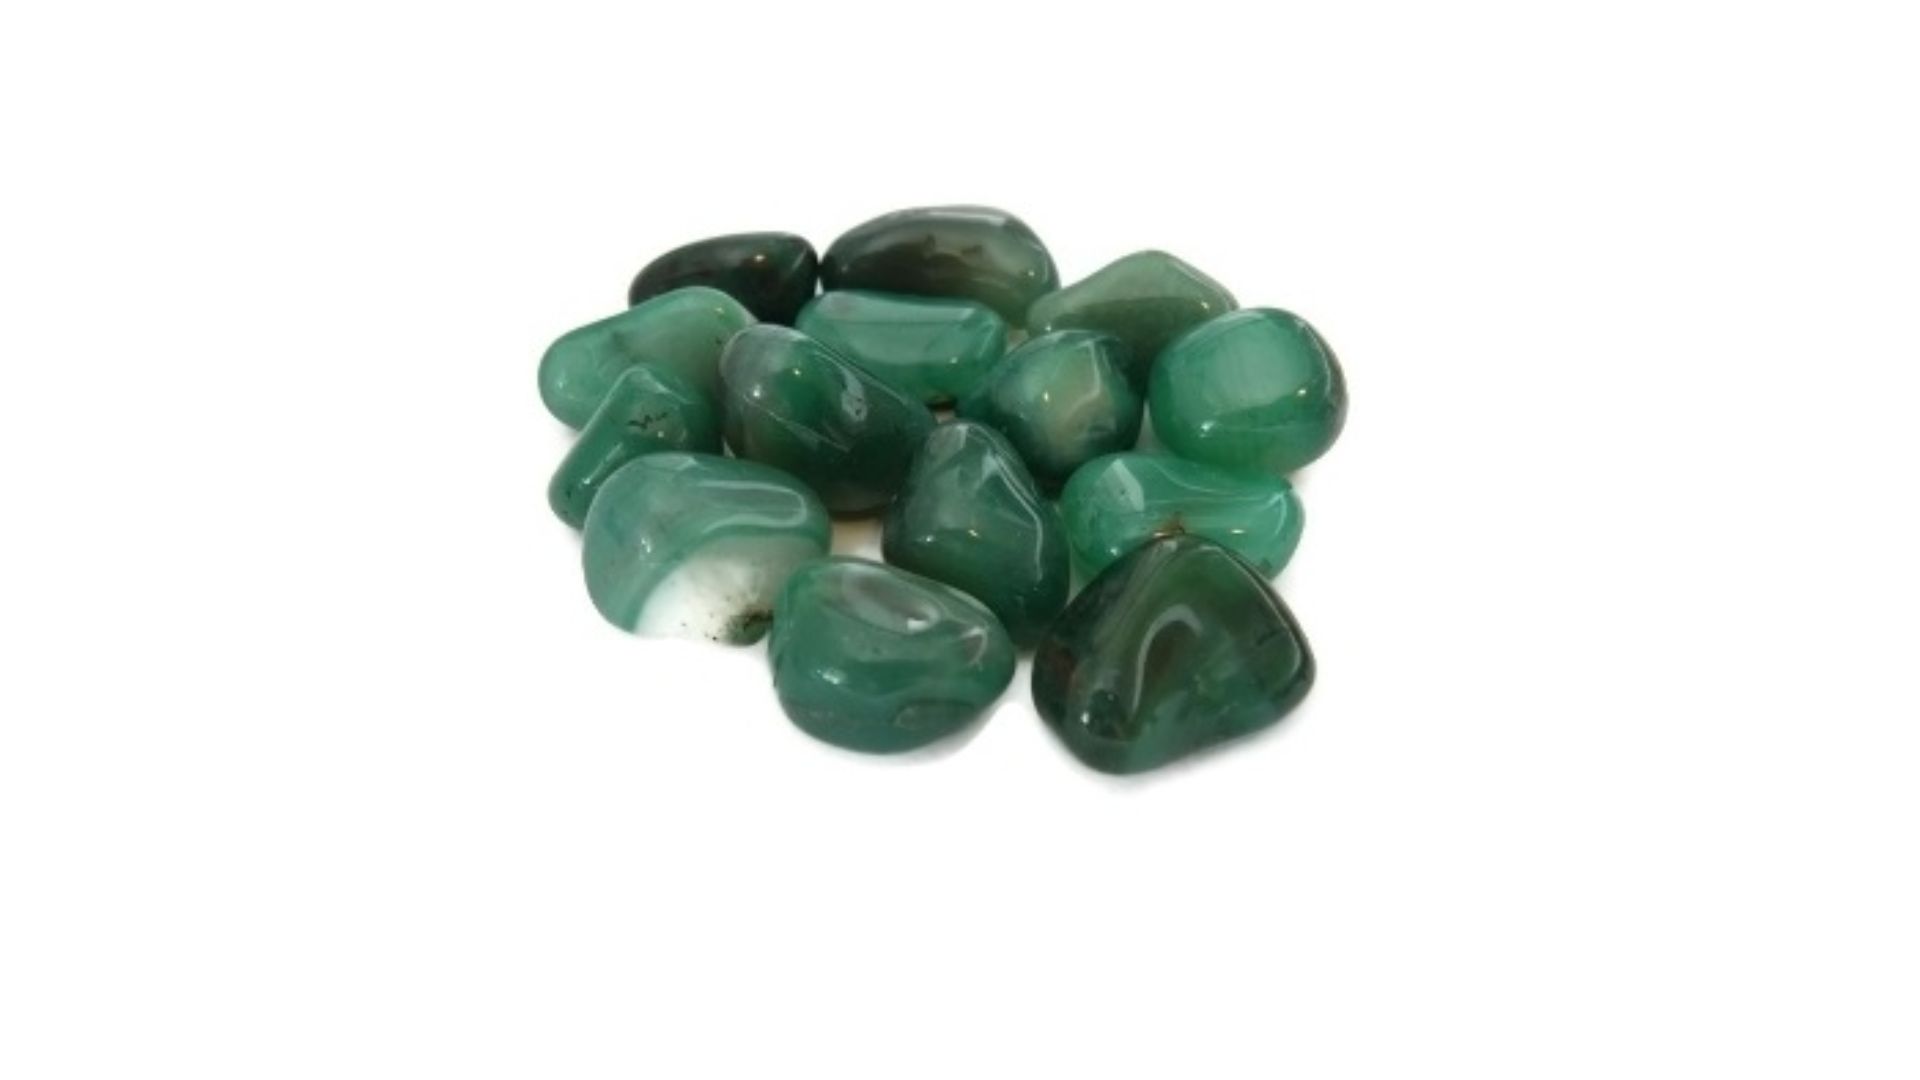 Small Stones Of Green Agate